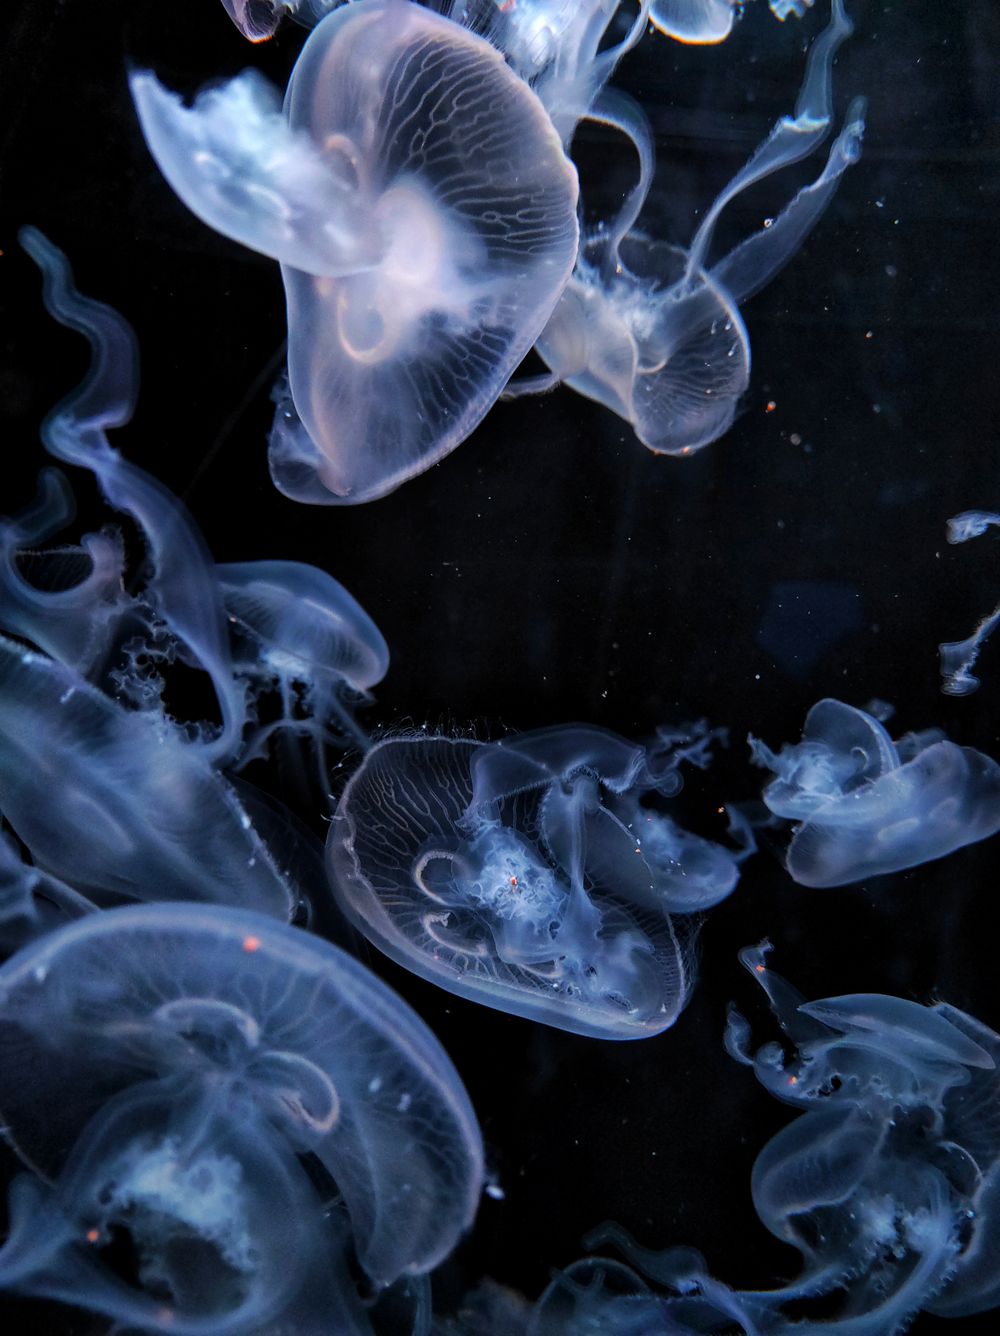 A group of jellyfish of the genus Aurelia aurita (also called the common jellyfish, moon jellyfish, moon jelly or saucer jelly) inside a tank at the Barcelona aquarium.